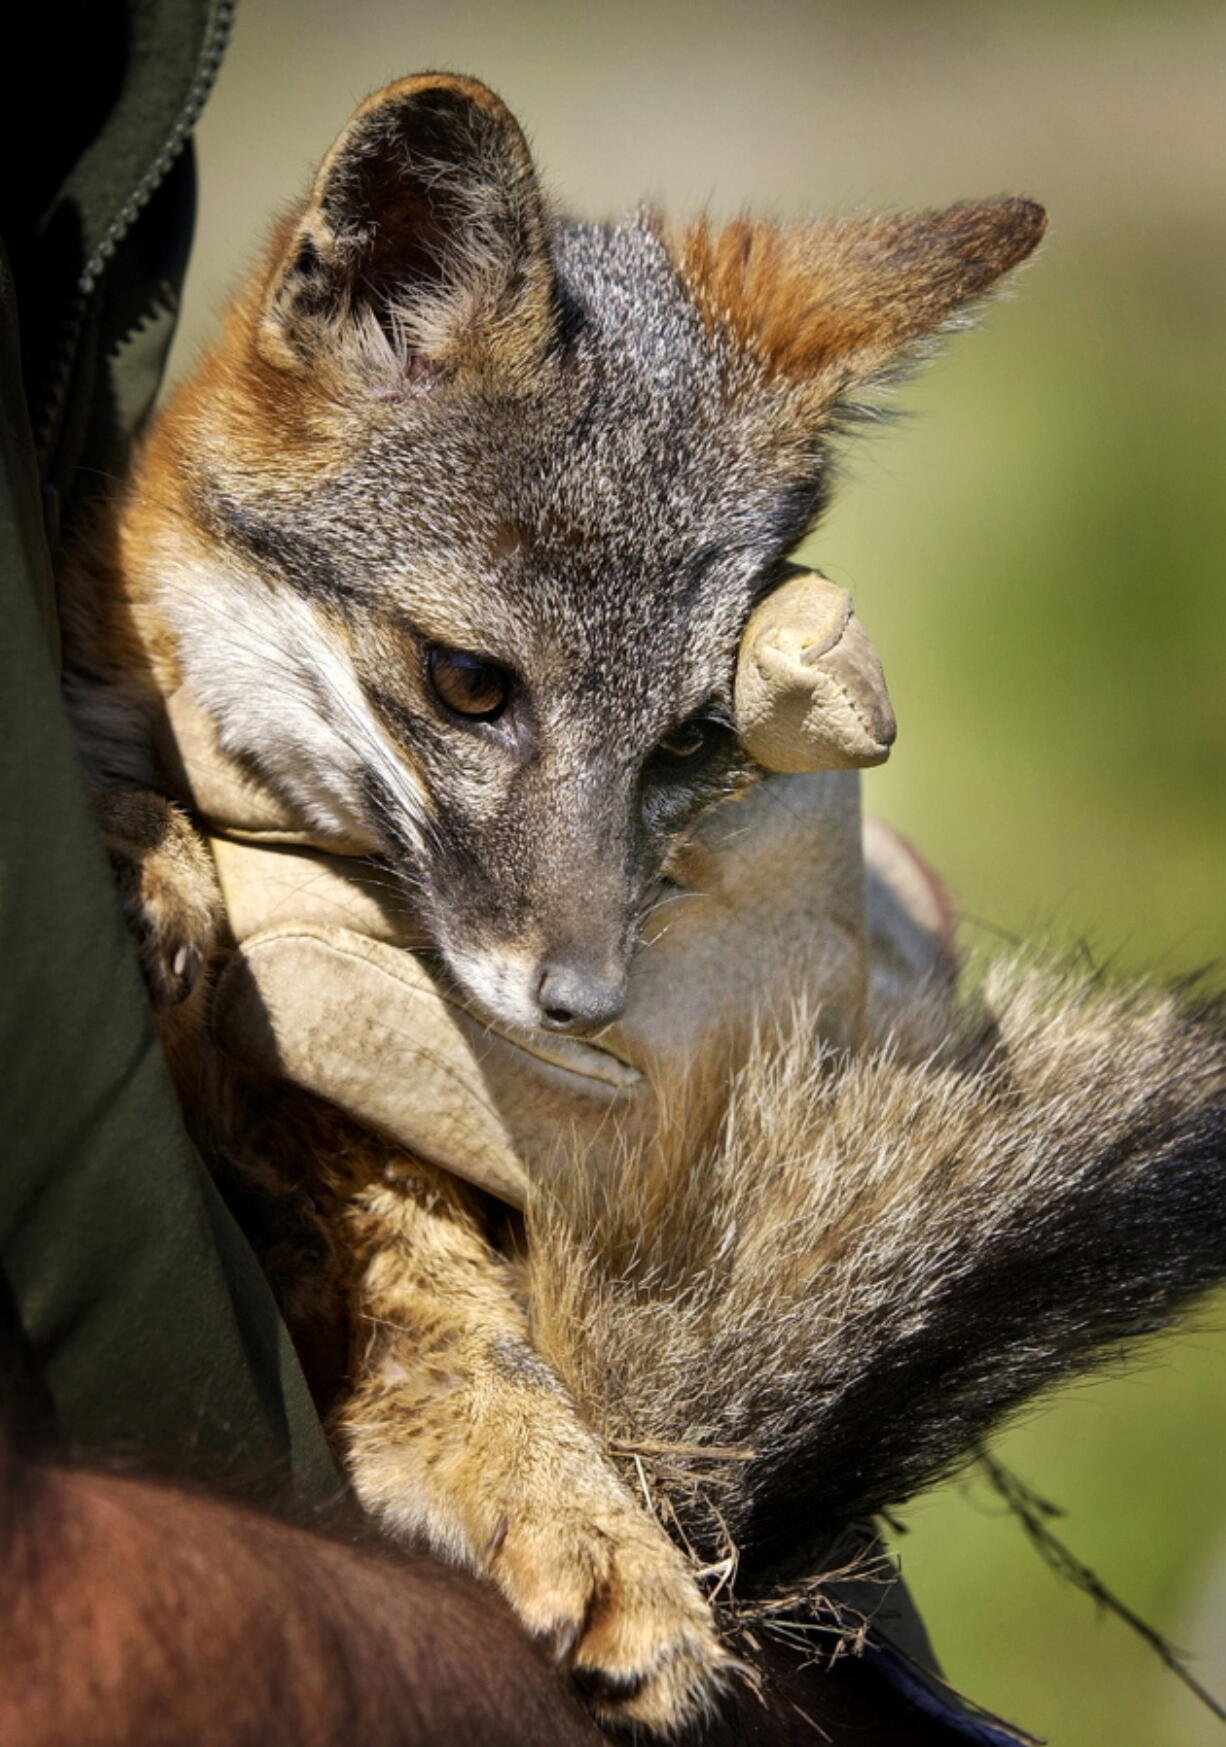 A Santa Cruz Island fox bred in captivity is held by a wildlife biologist for the National Park Service, on Santa Cruz Island in Channel Islands National Park, Calif.